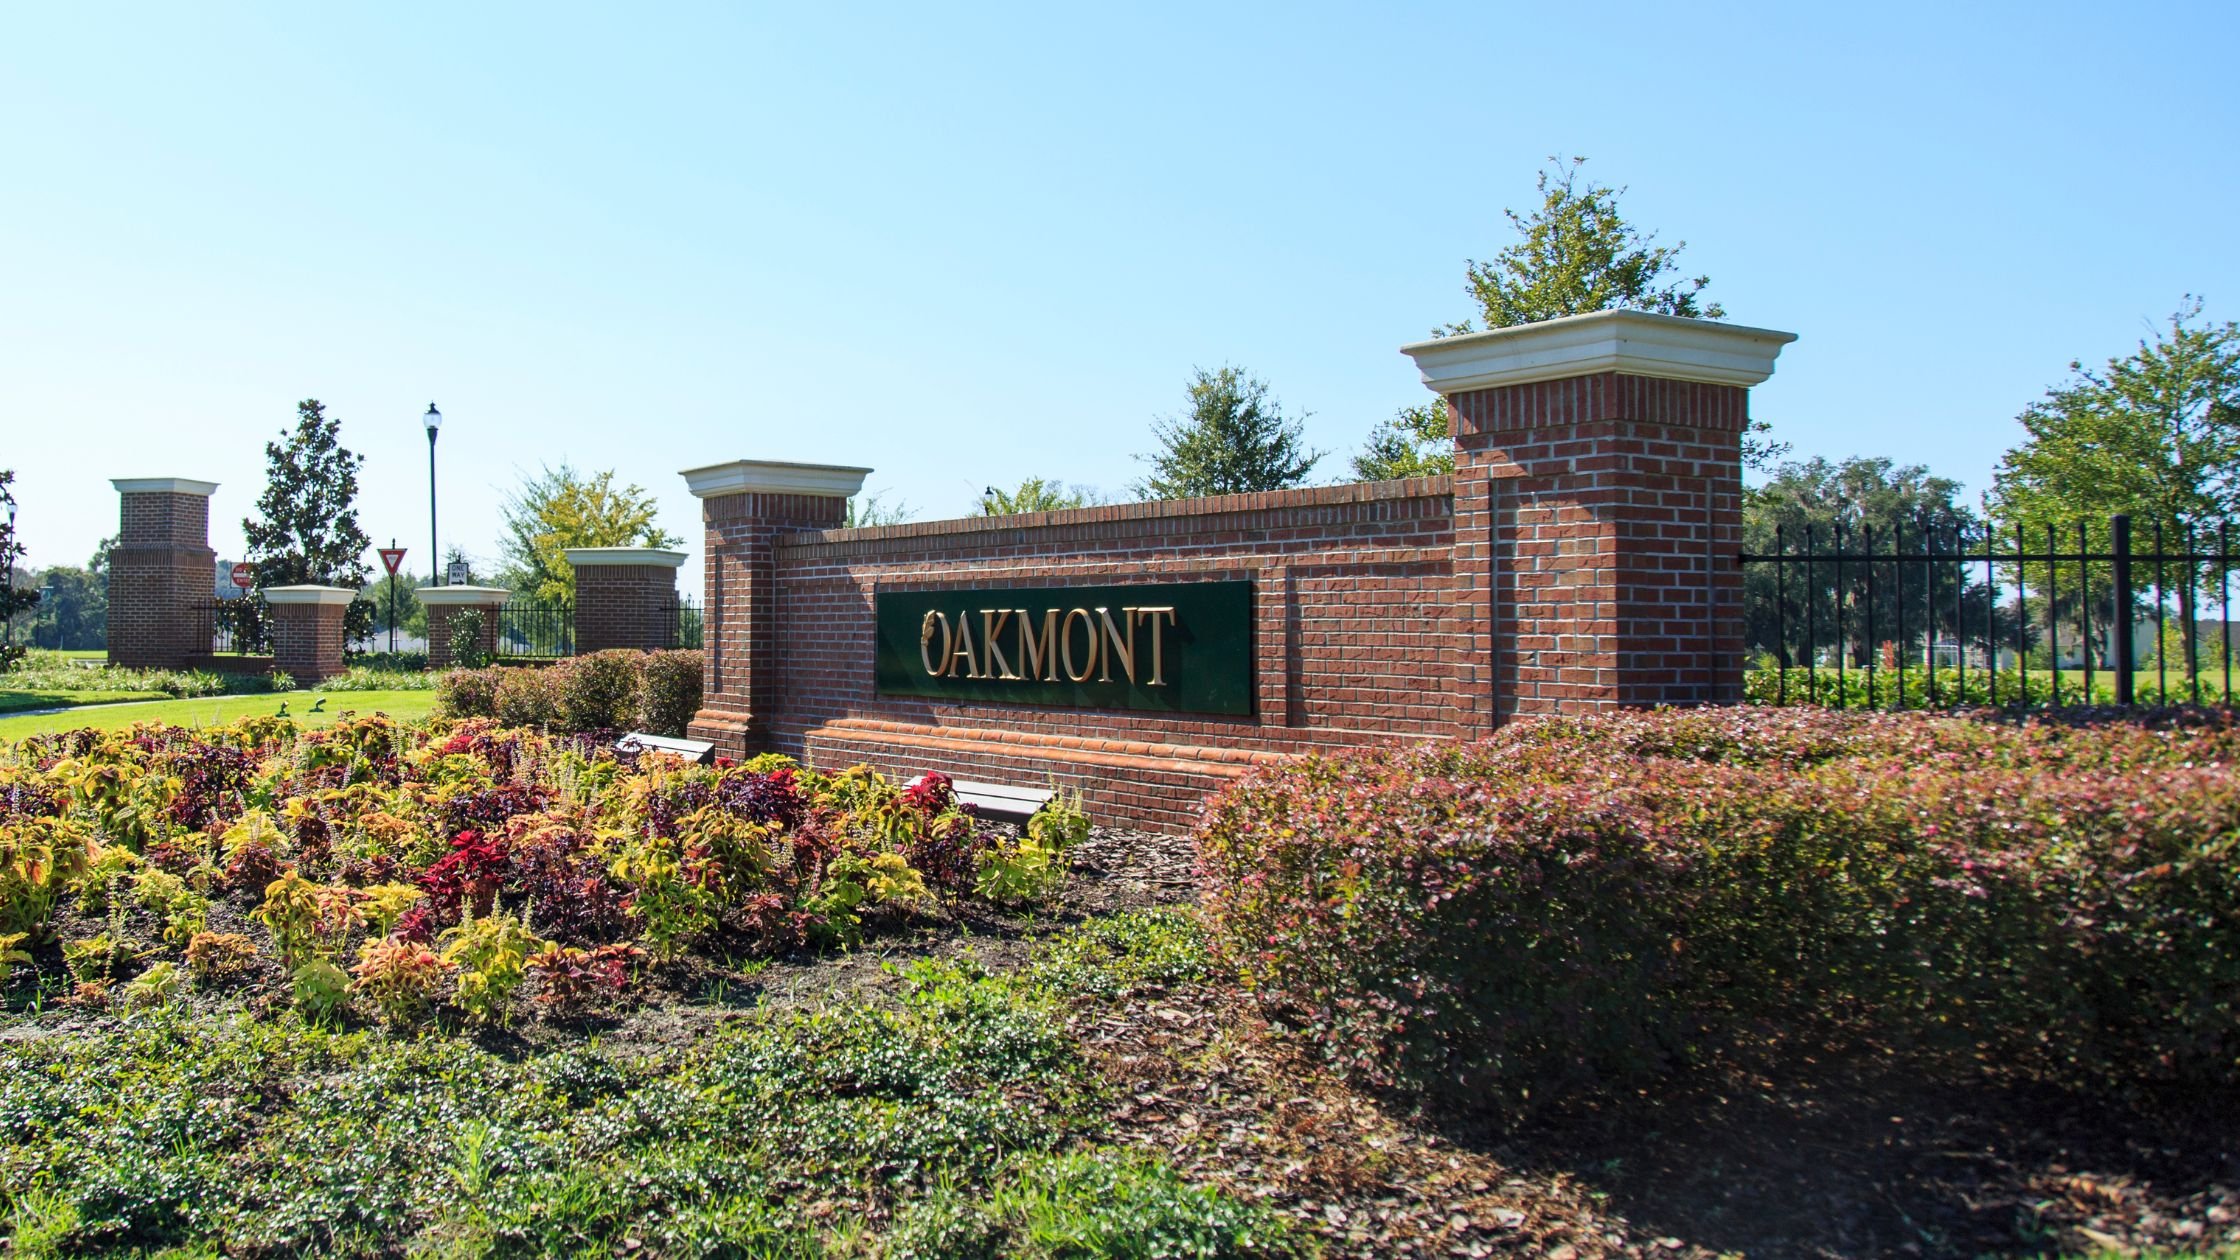 New Lots, More Opportunities to Buy Your Oakmont Home - Oakmont